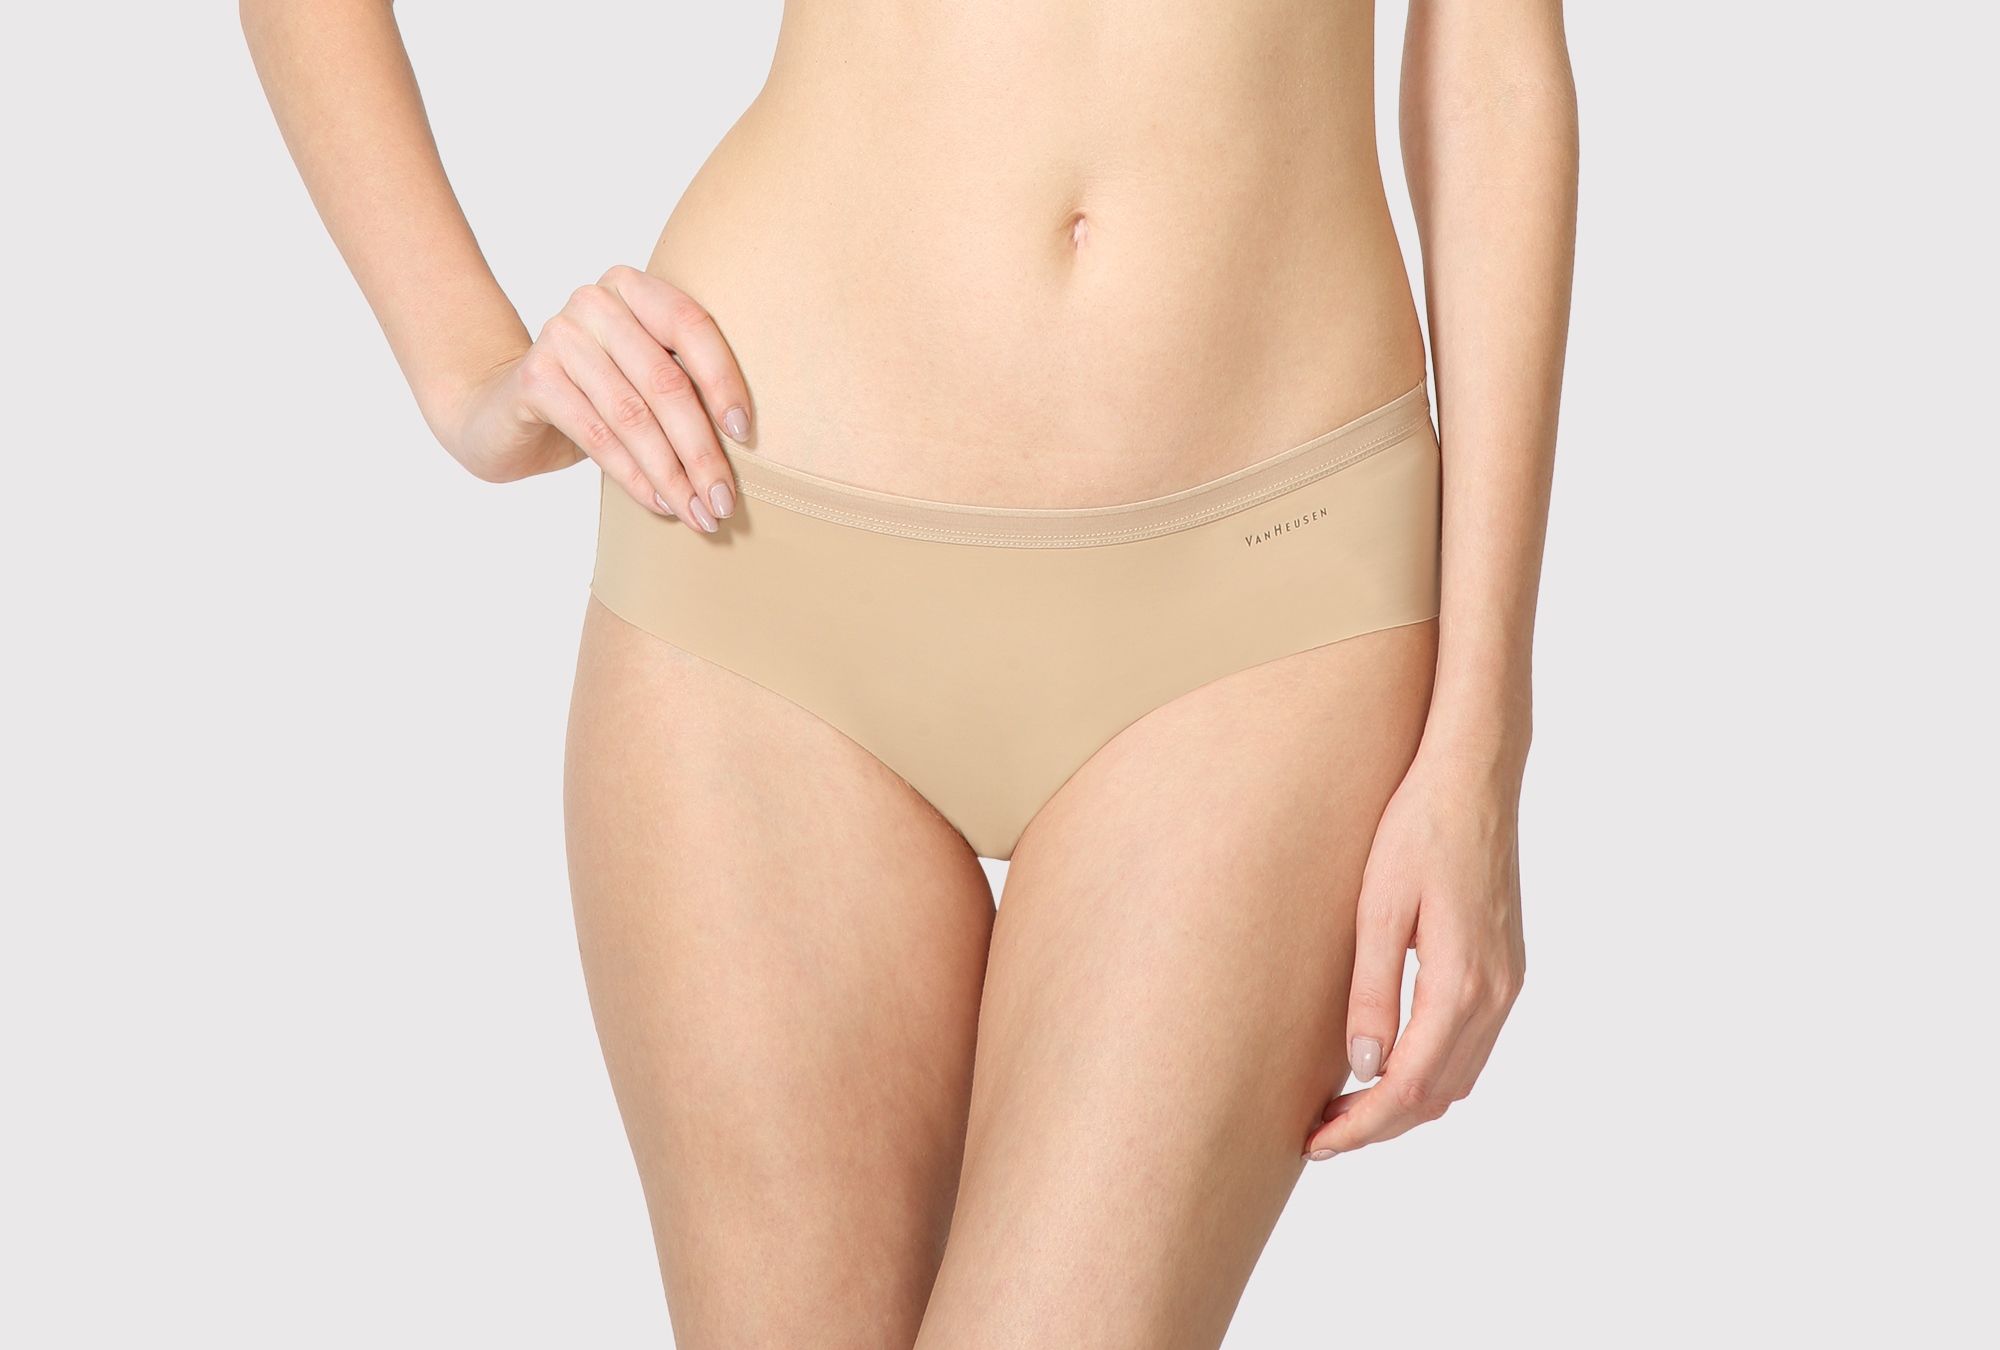 Intimates Panty, Hipster for Women at Vanheusenintimates.in